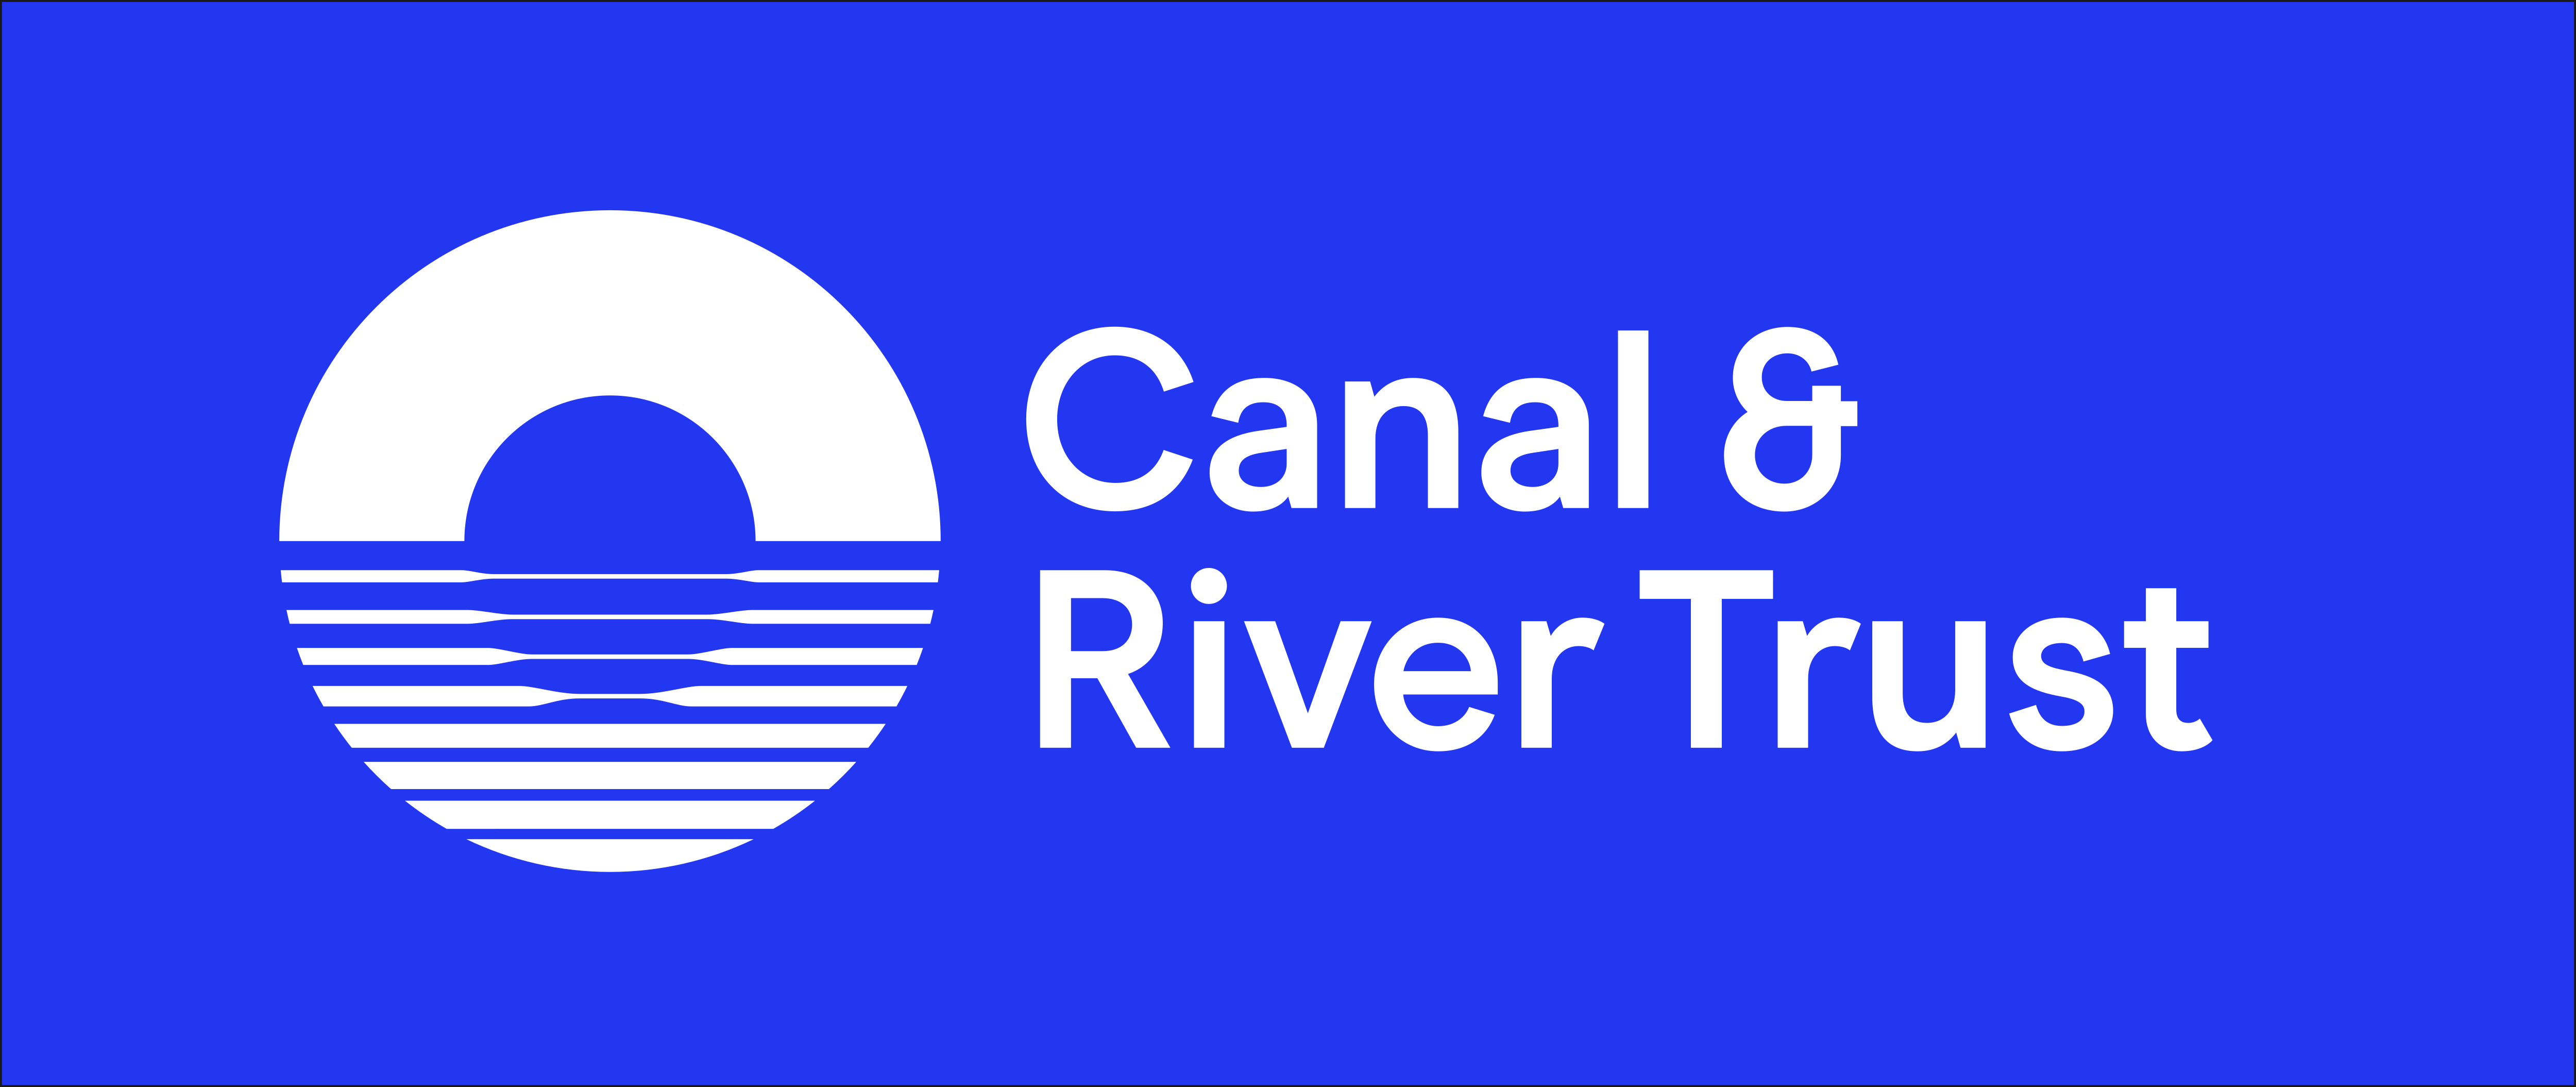 Canal & River Trust – Logos Download